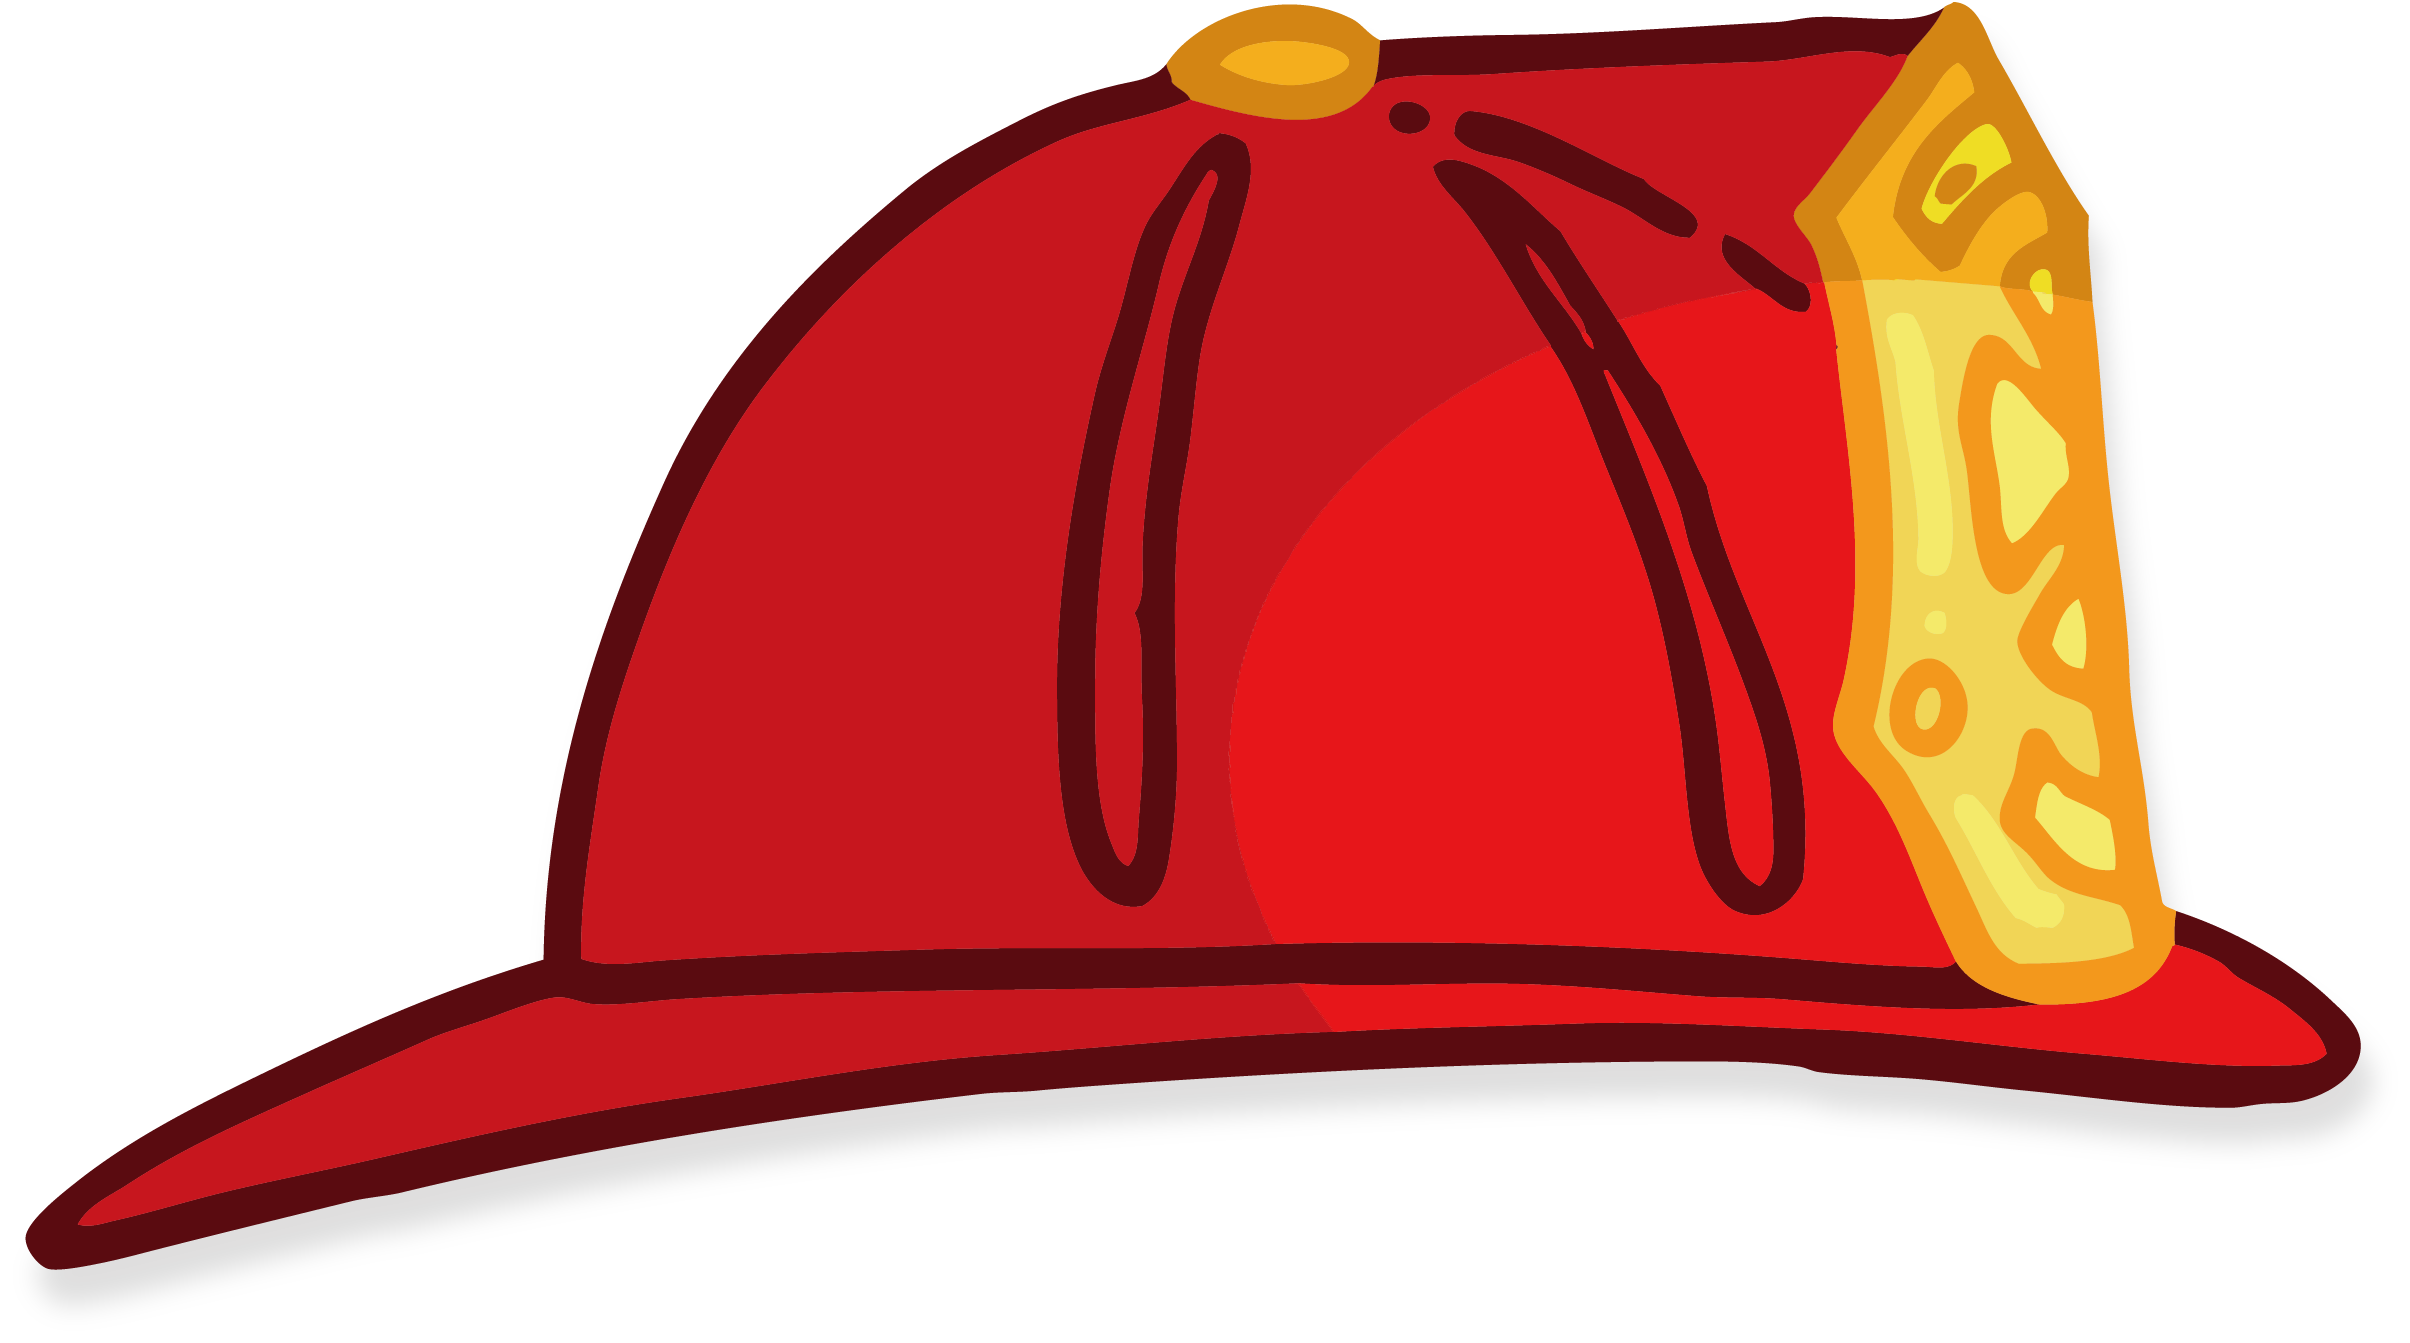 Firefighter Hat Printable Free